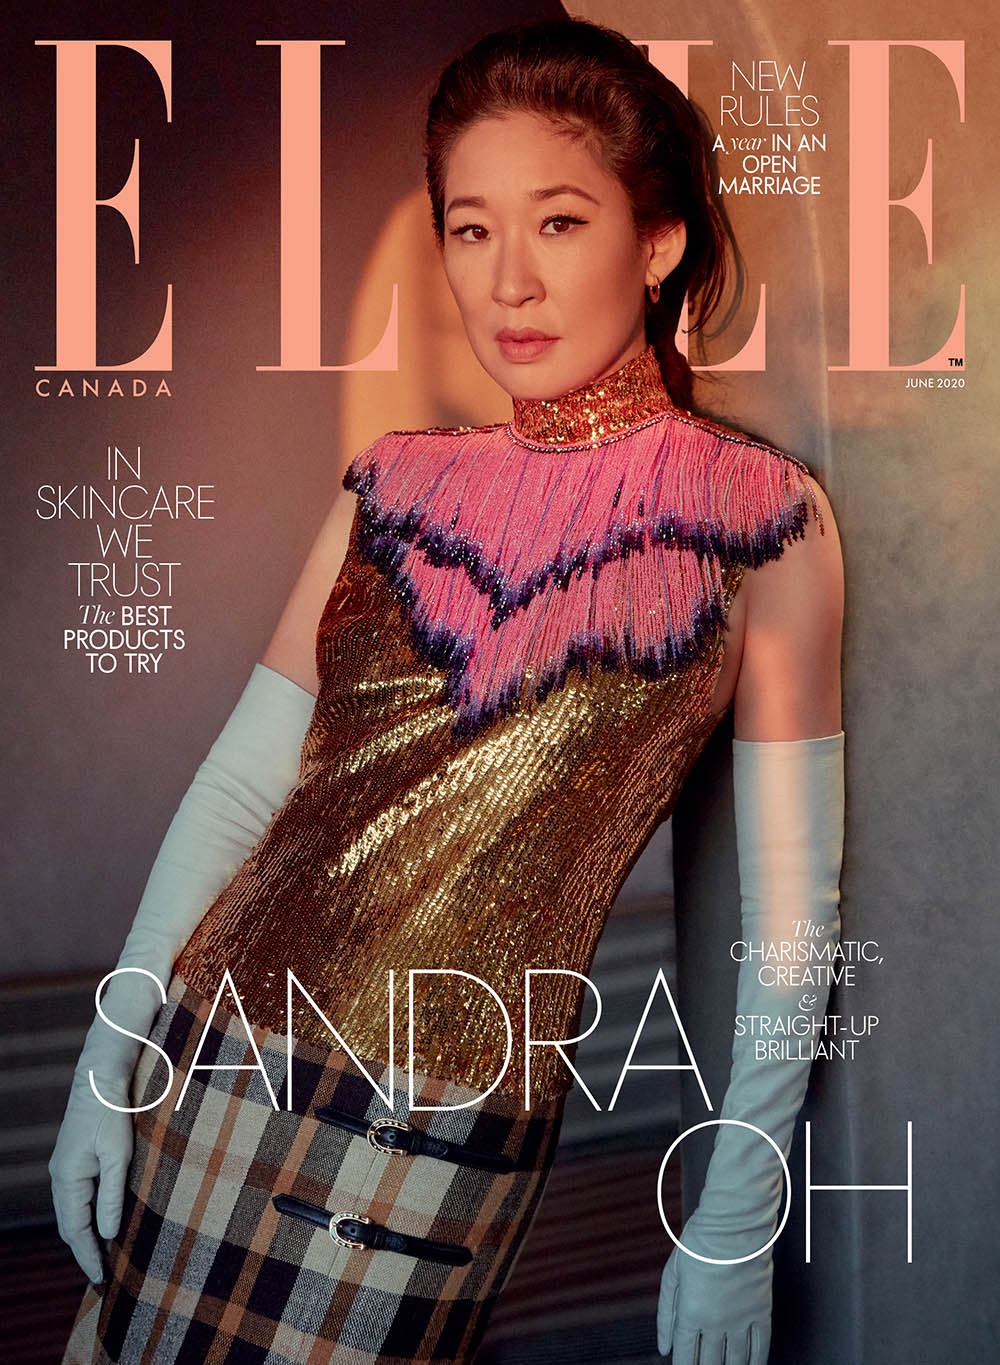 Sandra Oh covers Elle Canada June 2020 by Greg Swales